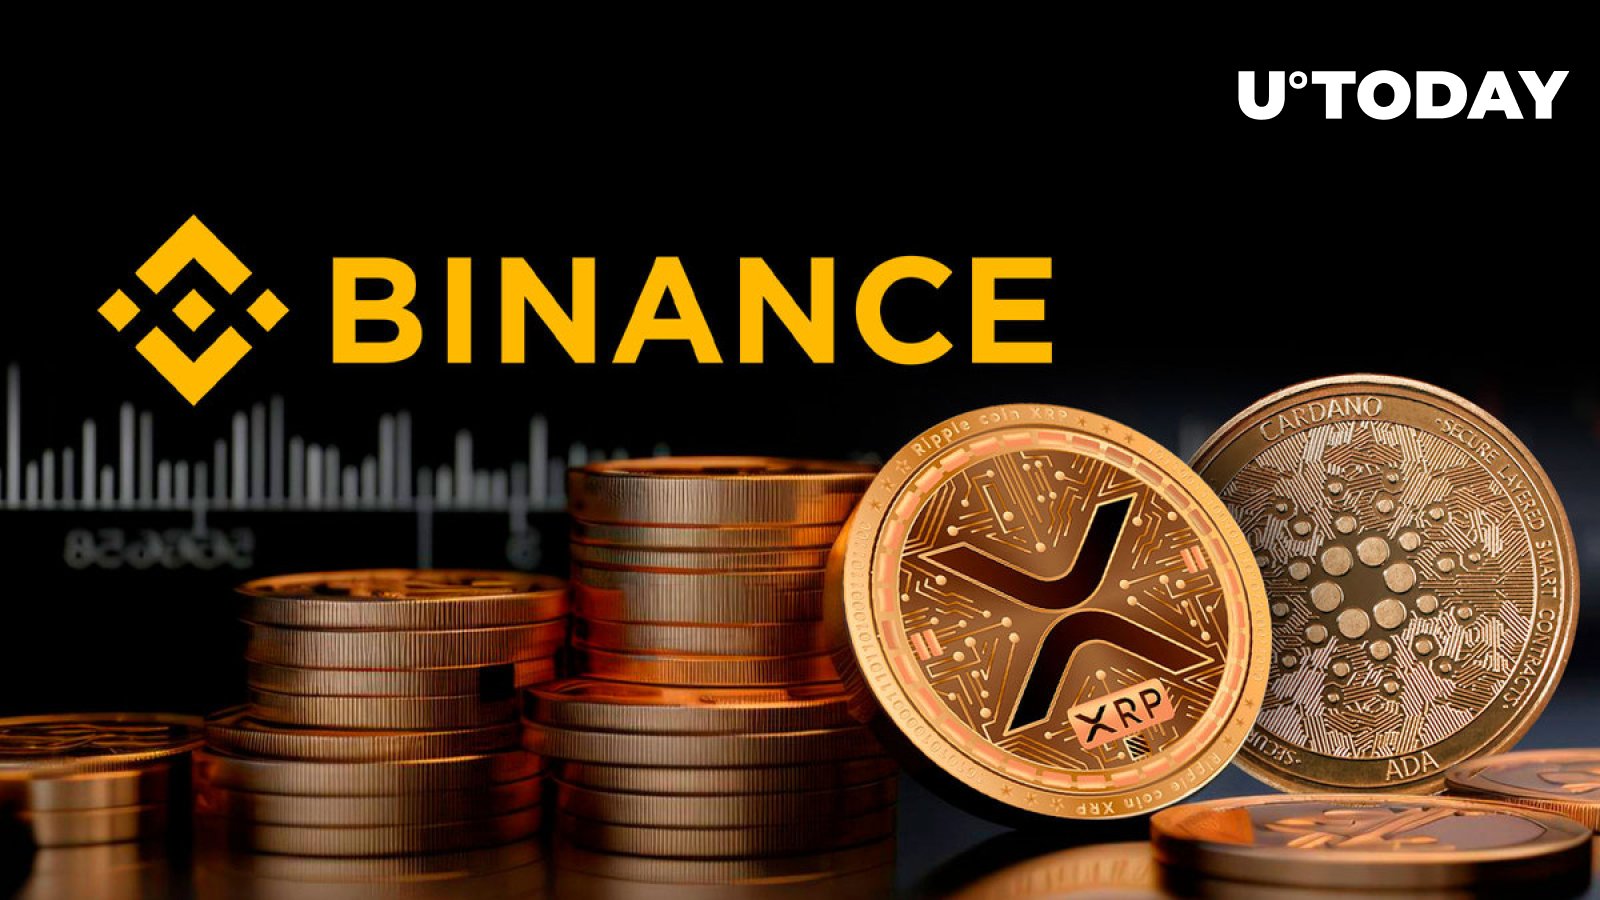 New XRP, ADA Futures Listing to Be Made by Binance: Details